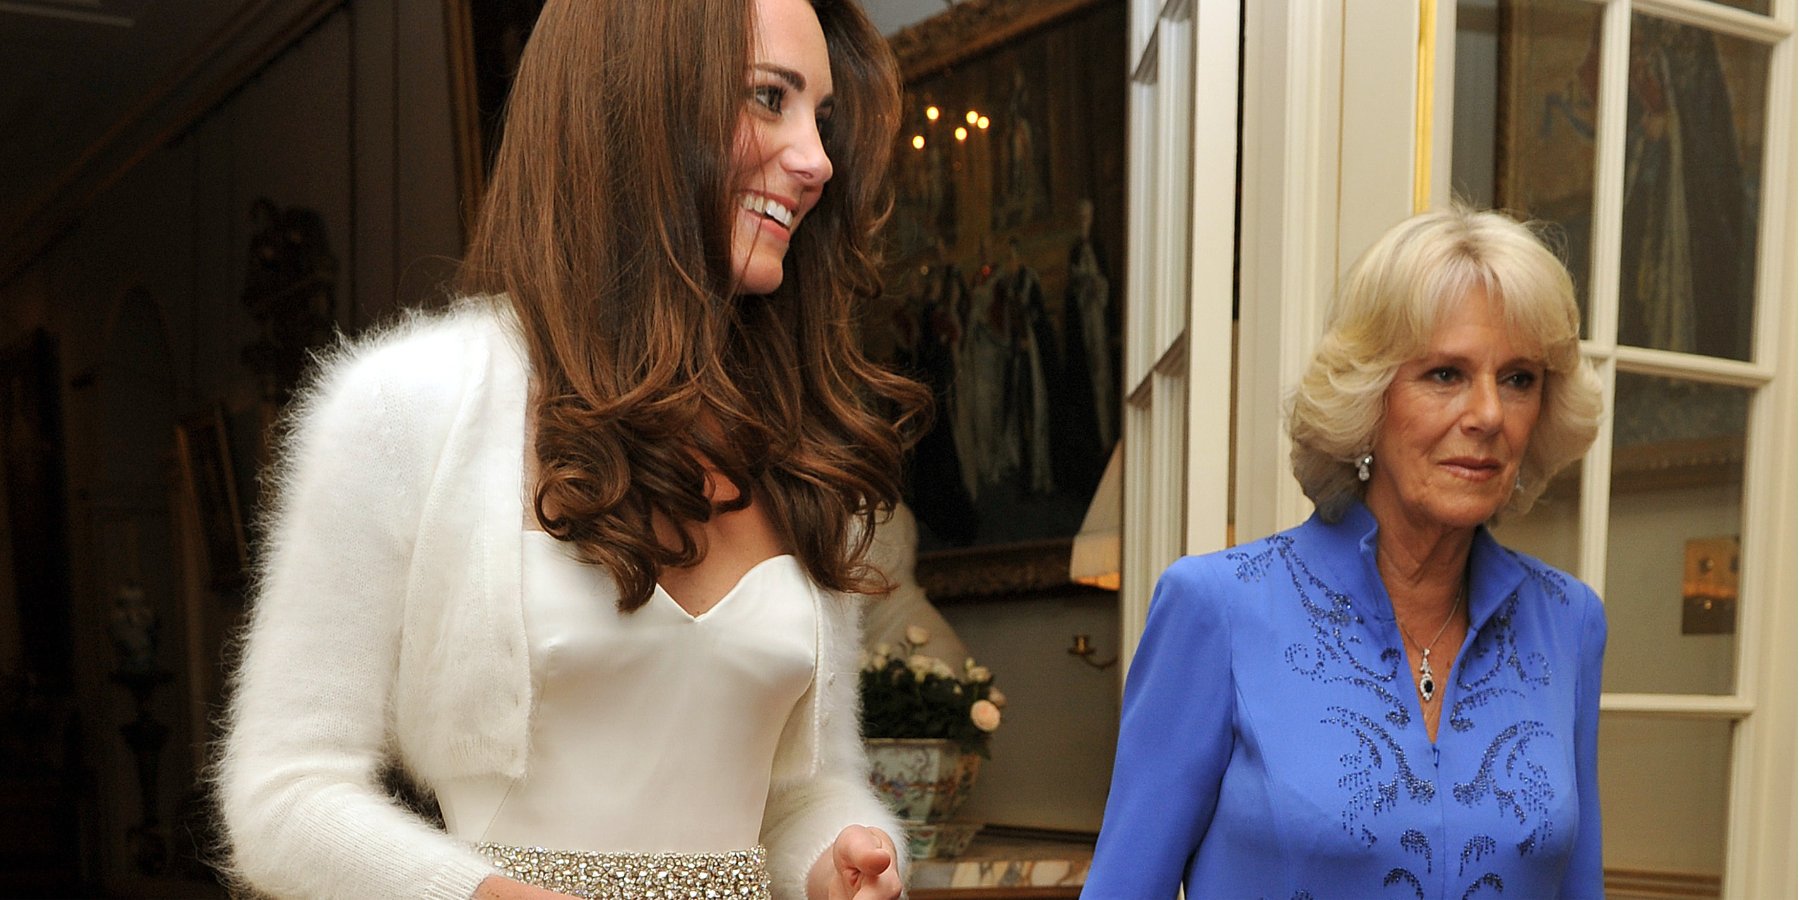 Kate Middleton and Camilla Parker Bowles pose as Kate heads to her wedding reception in 2011.